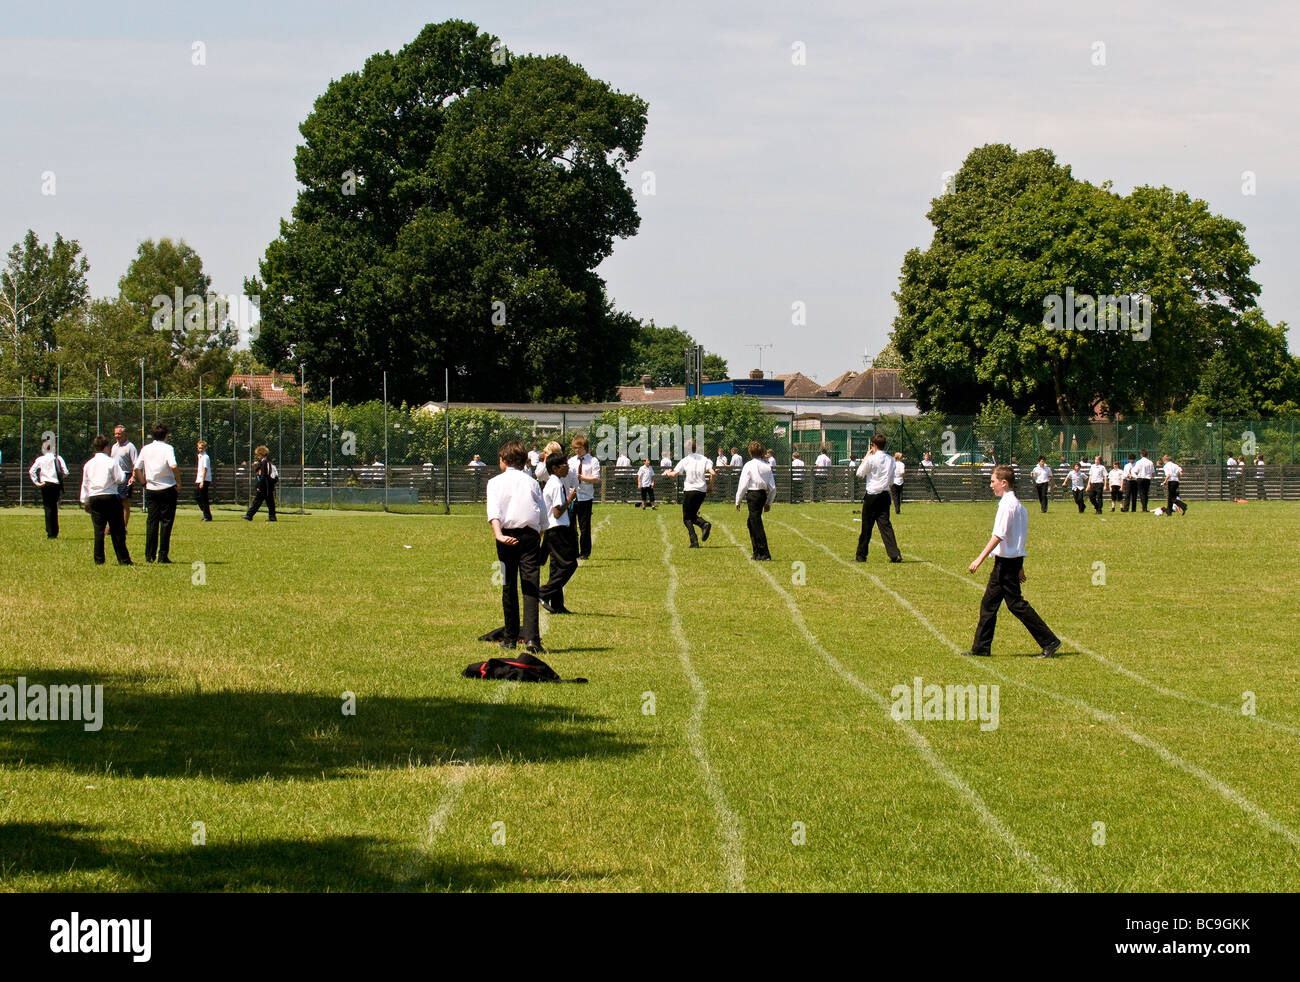 Students pupils on a school playing field. Stock Photo